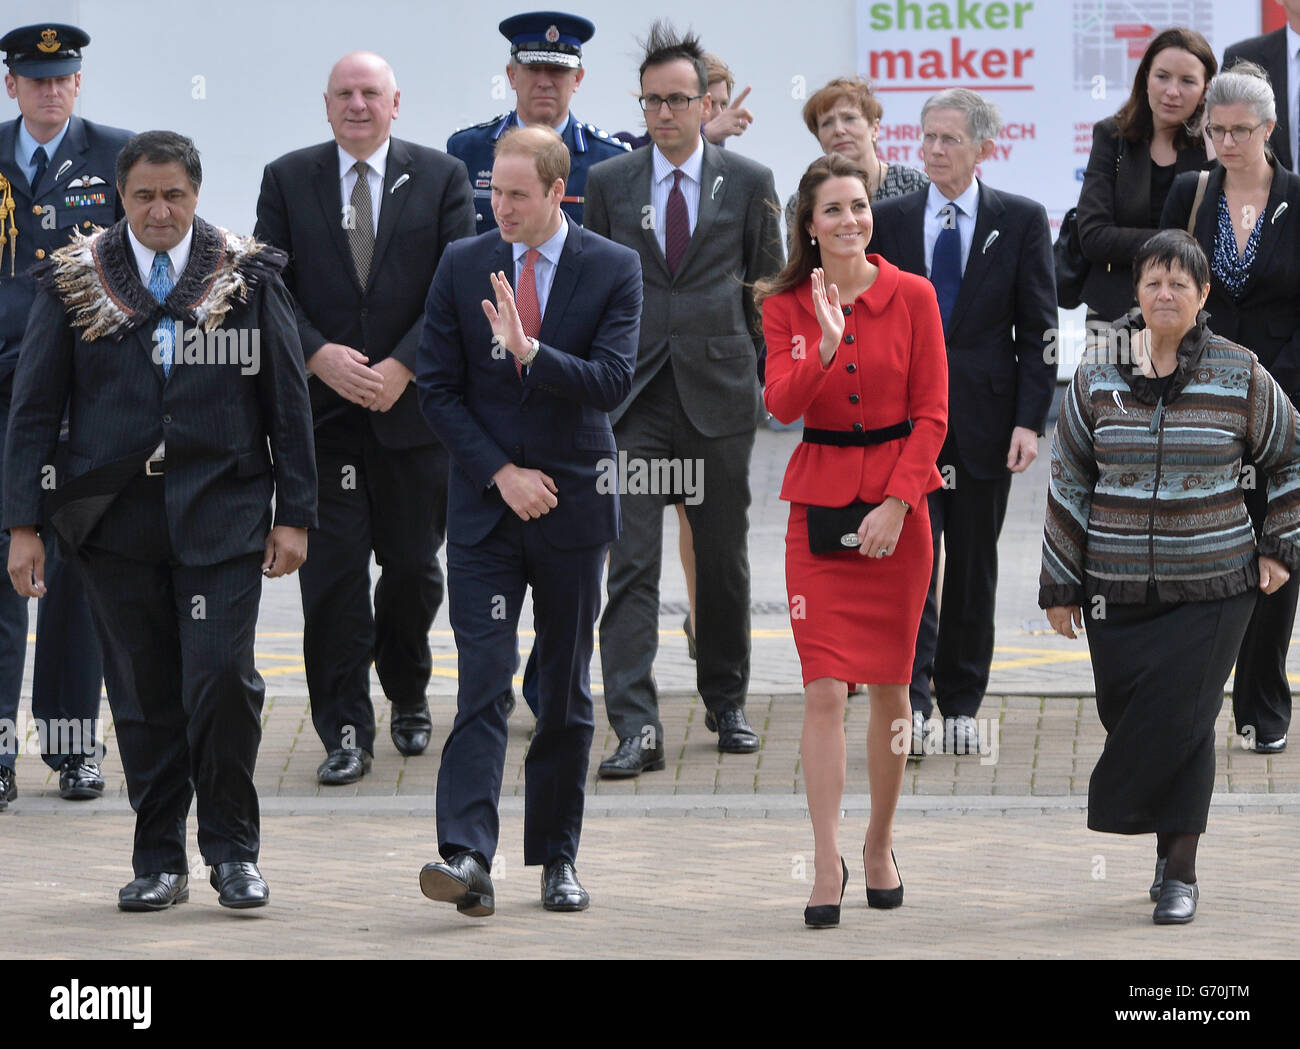 The Duke and Duchess of Cambridge are greeted by members of the Ngai Tahu iwi as they attend a welcome ceremony at Christchurch City Council Building during the eighth day of their official tour to New Zealand. Stock Photo